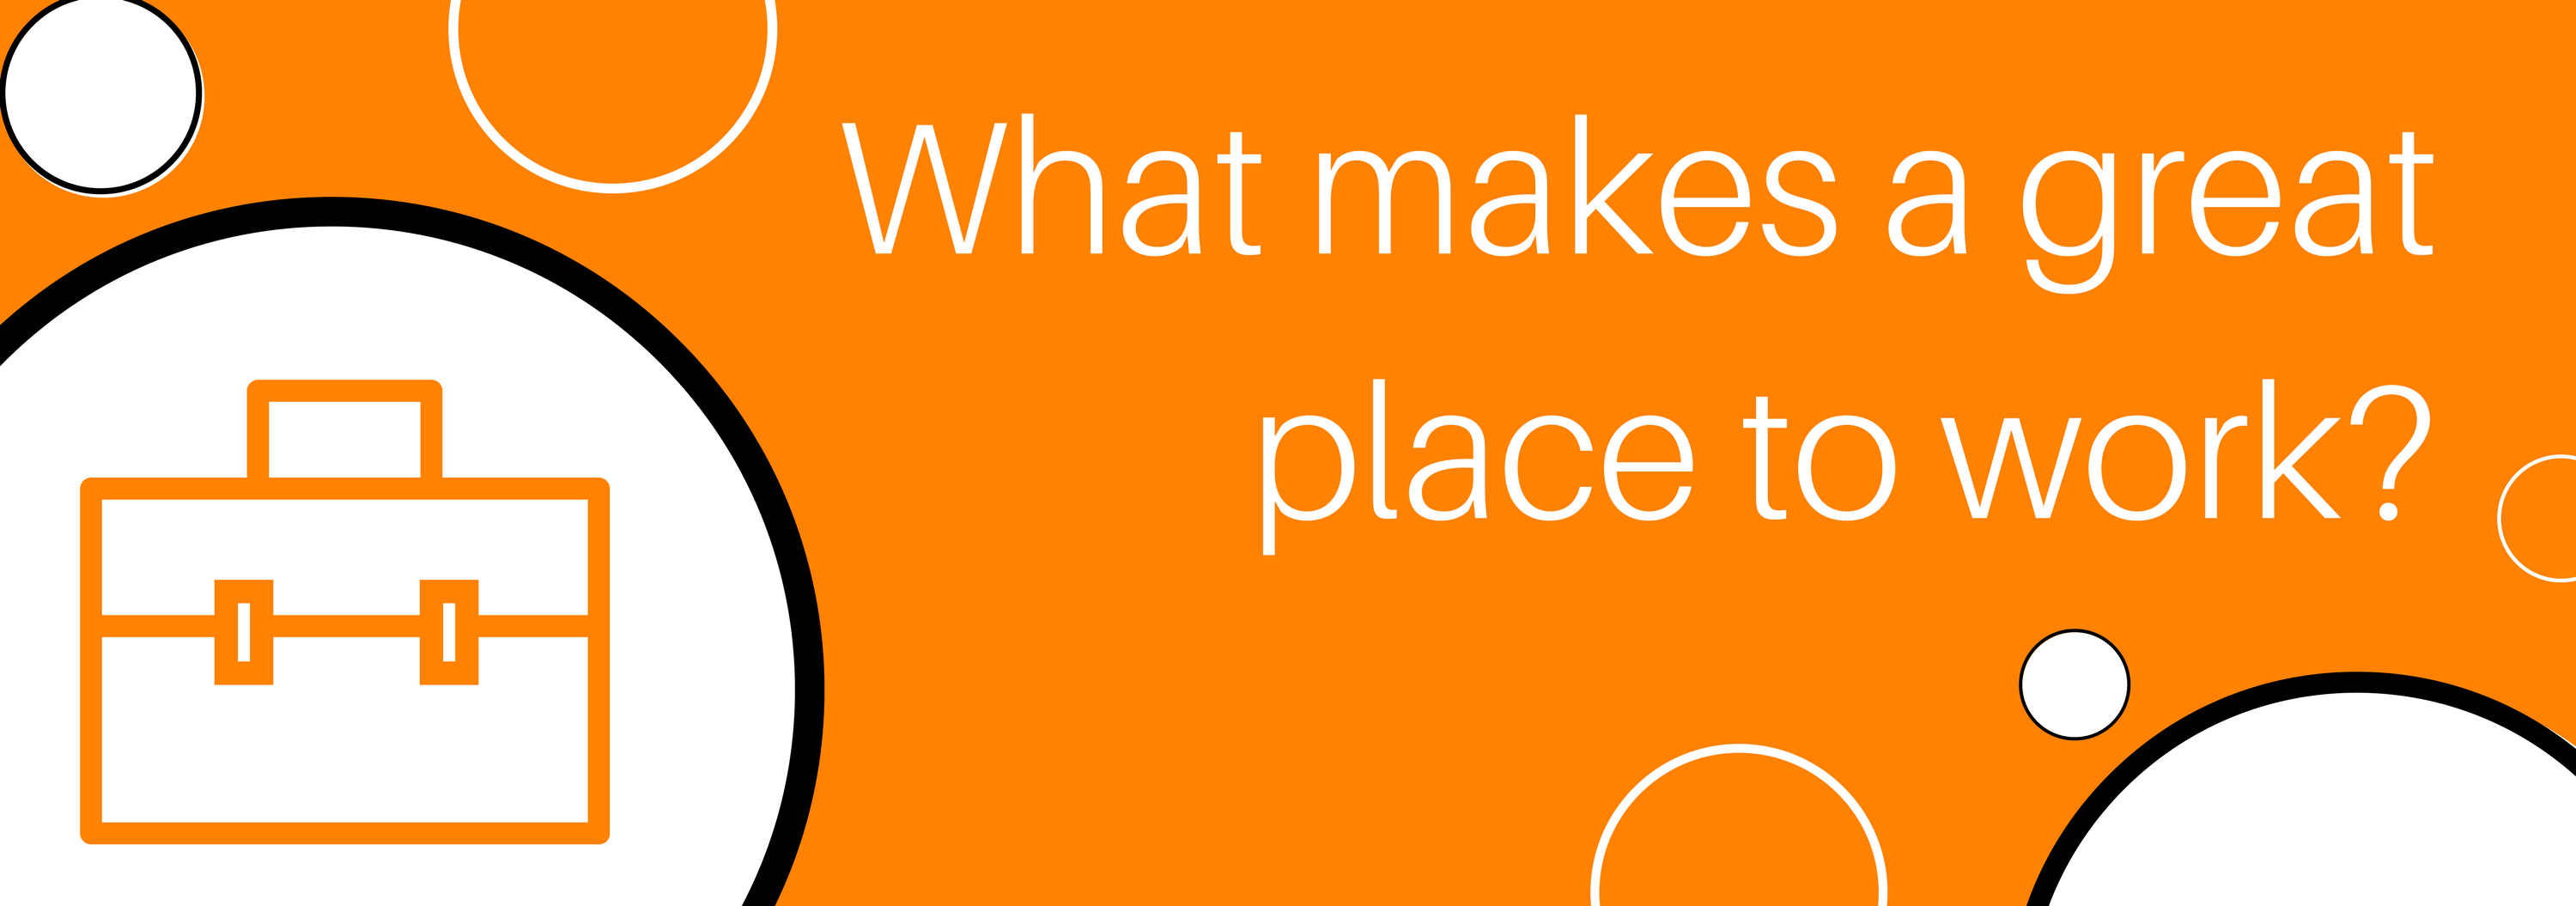 What makes a great place to work?